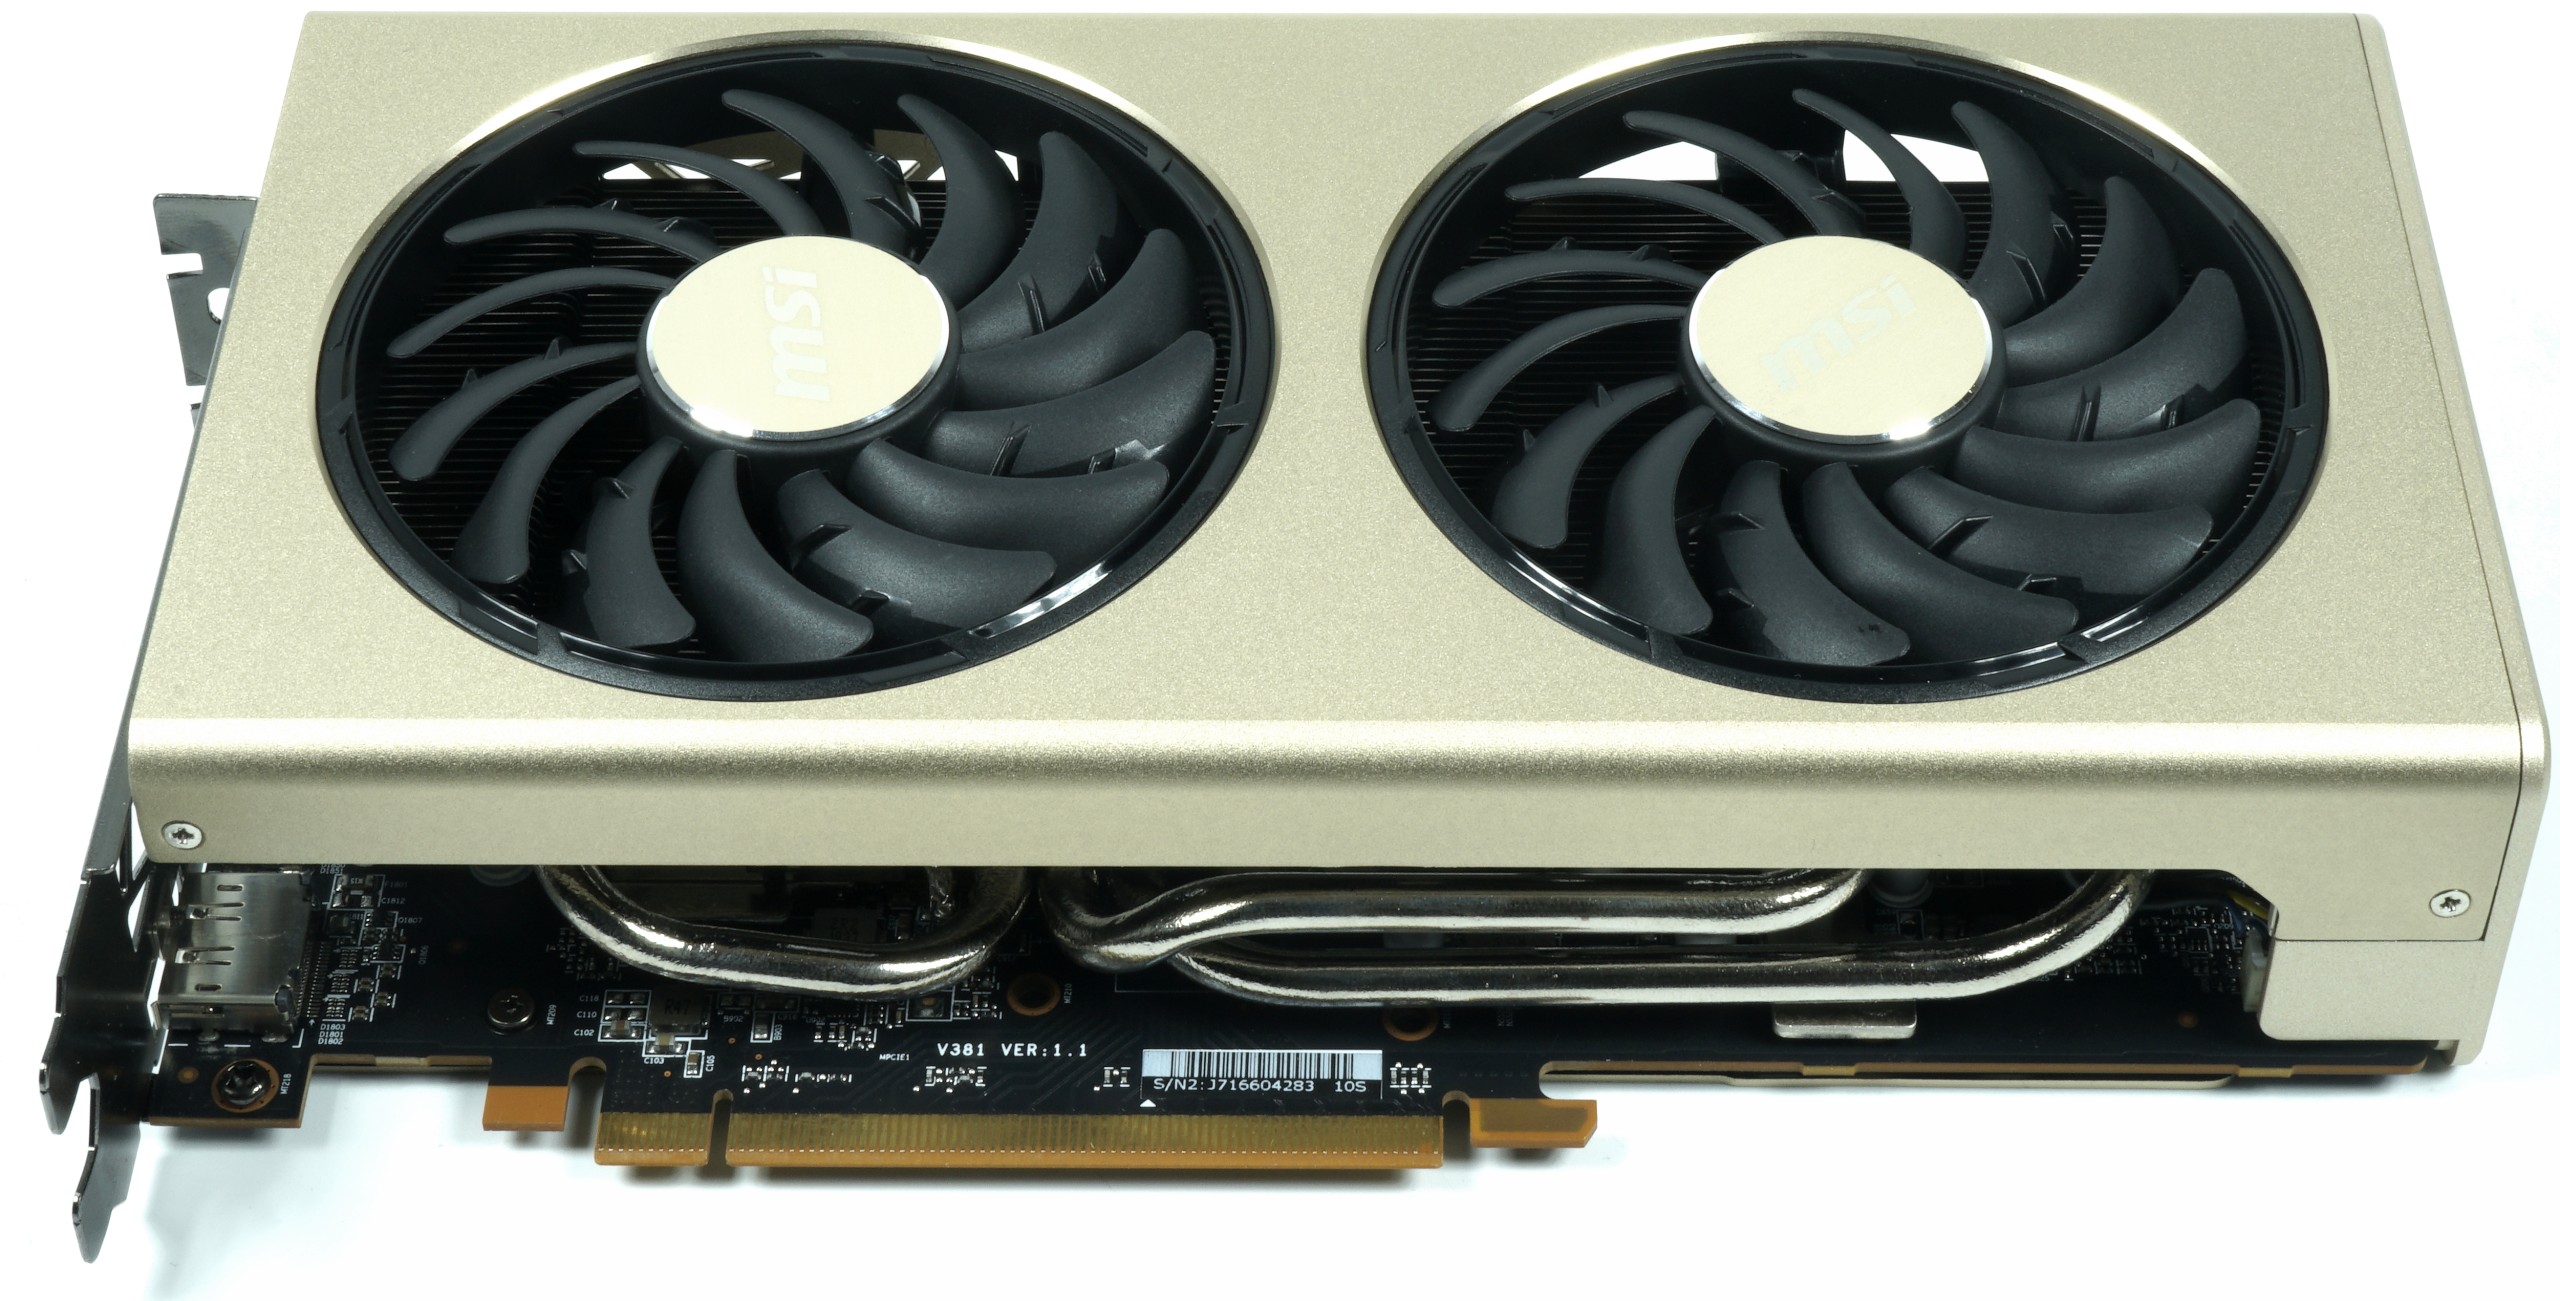 MSI Radeon RX 5700 XT Evoke OC Edition tested - butter or